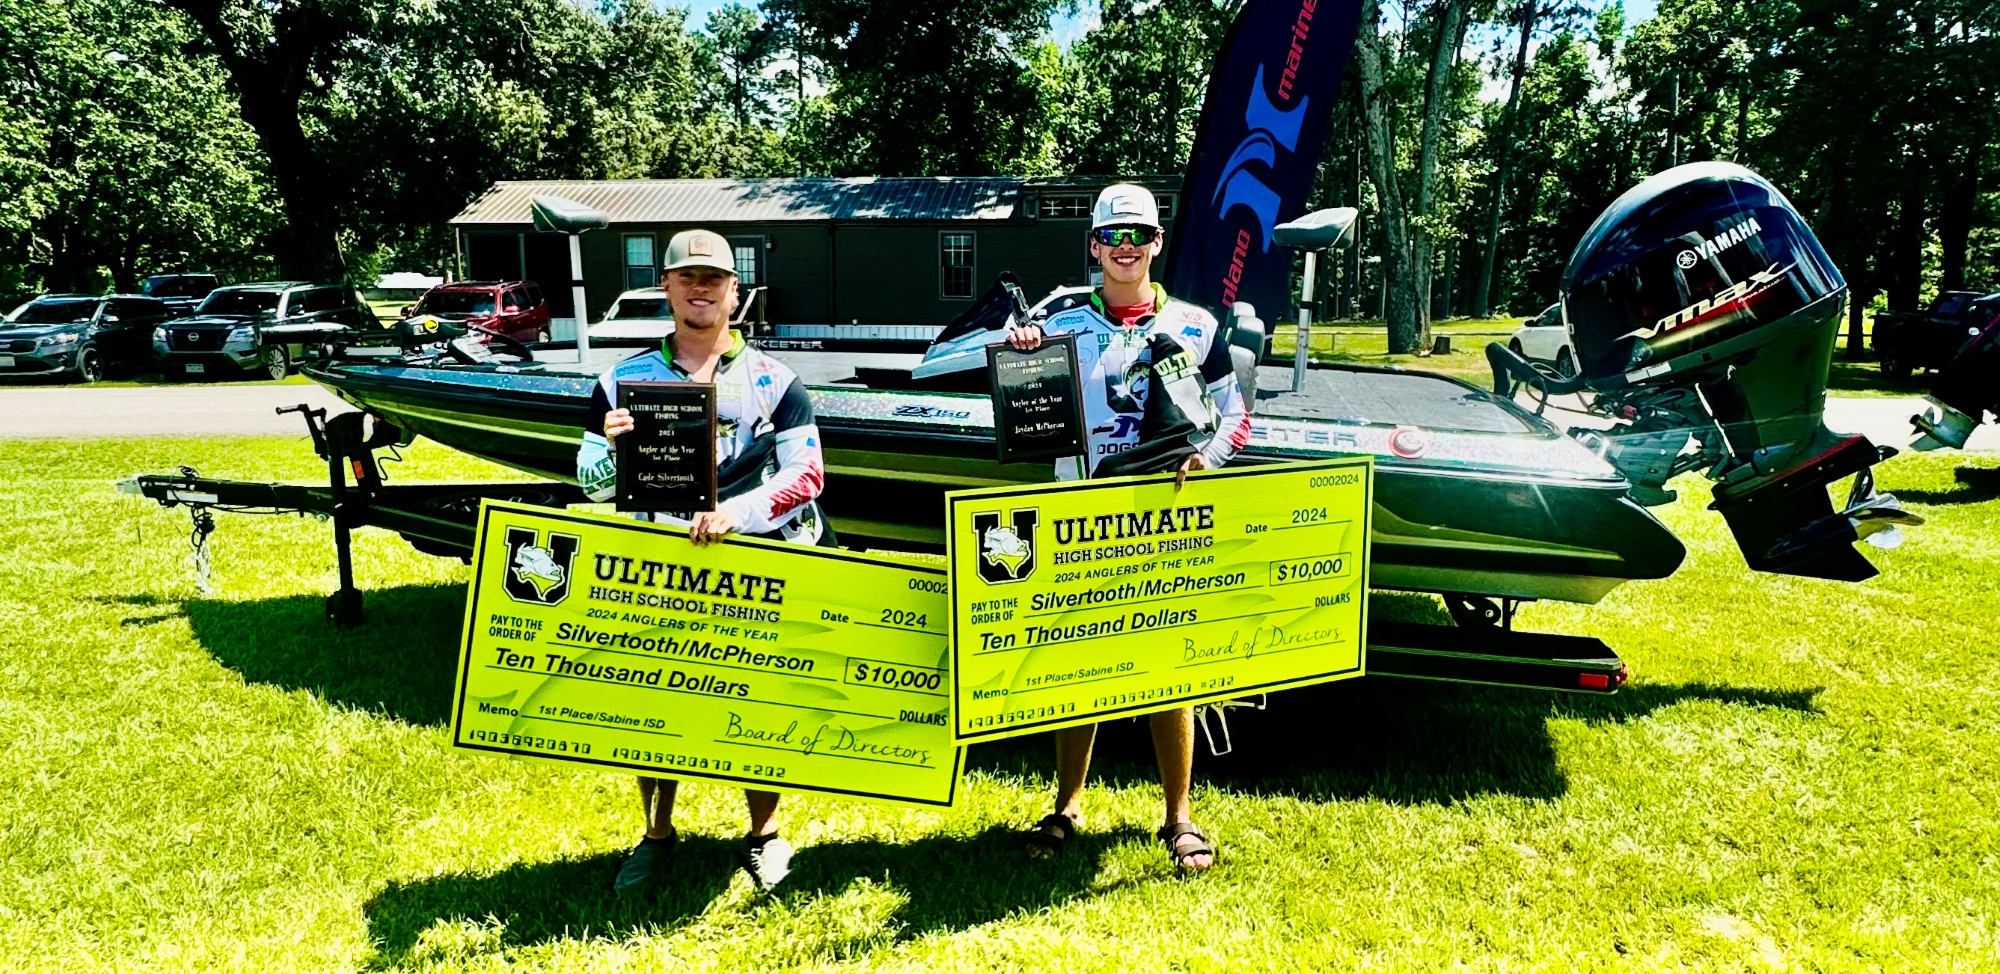 Cade Silvertooth and Jaydan McPherson won $10,000 in scholarships from Ultimate High School Fishing and a Skeeter boat from Plano Marine in their final year, their senior year, of fishing together at Sabine High School. (Photo courtesy of BRANDT McPHERSON; photos below also courtesy of Mr. McPherson)